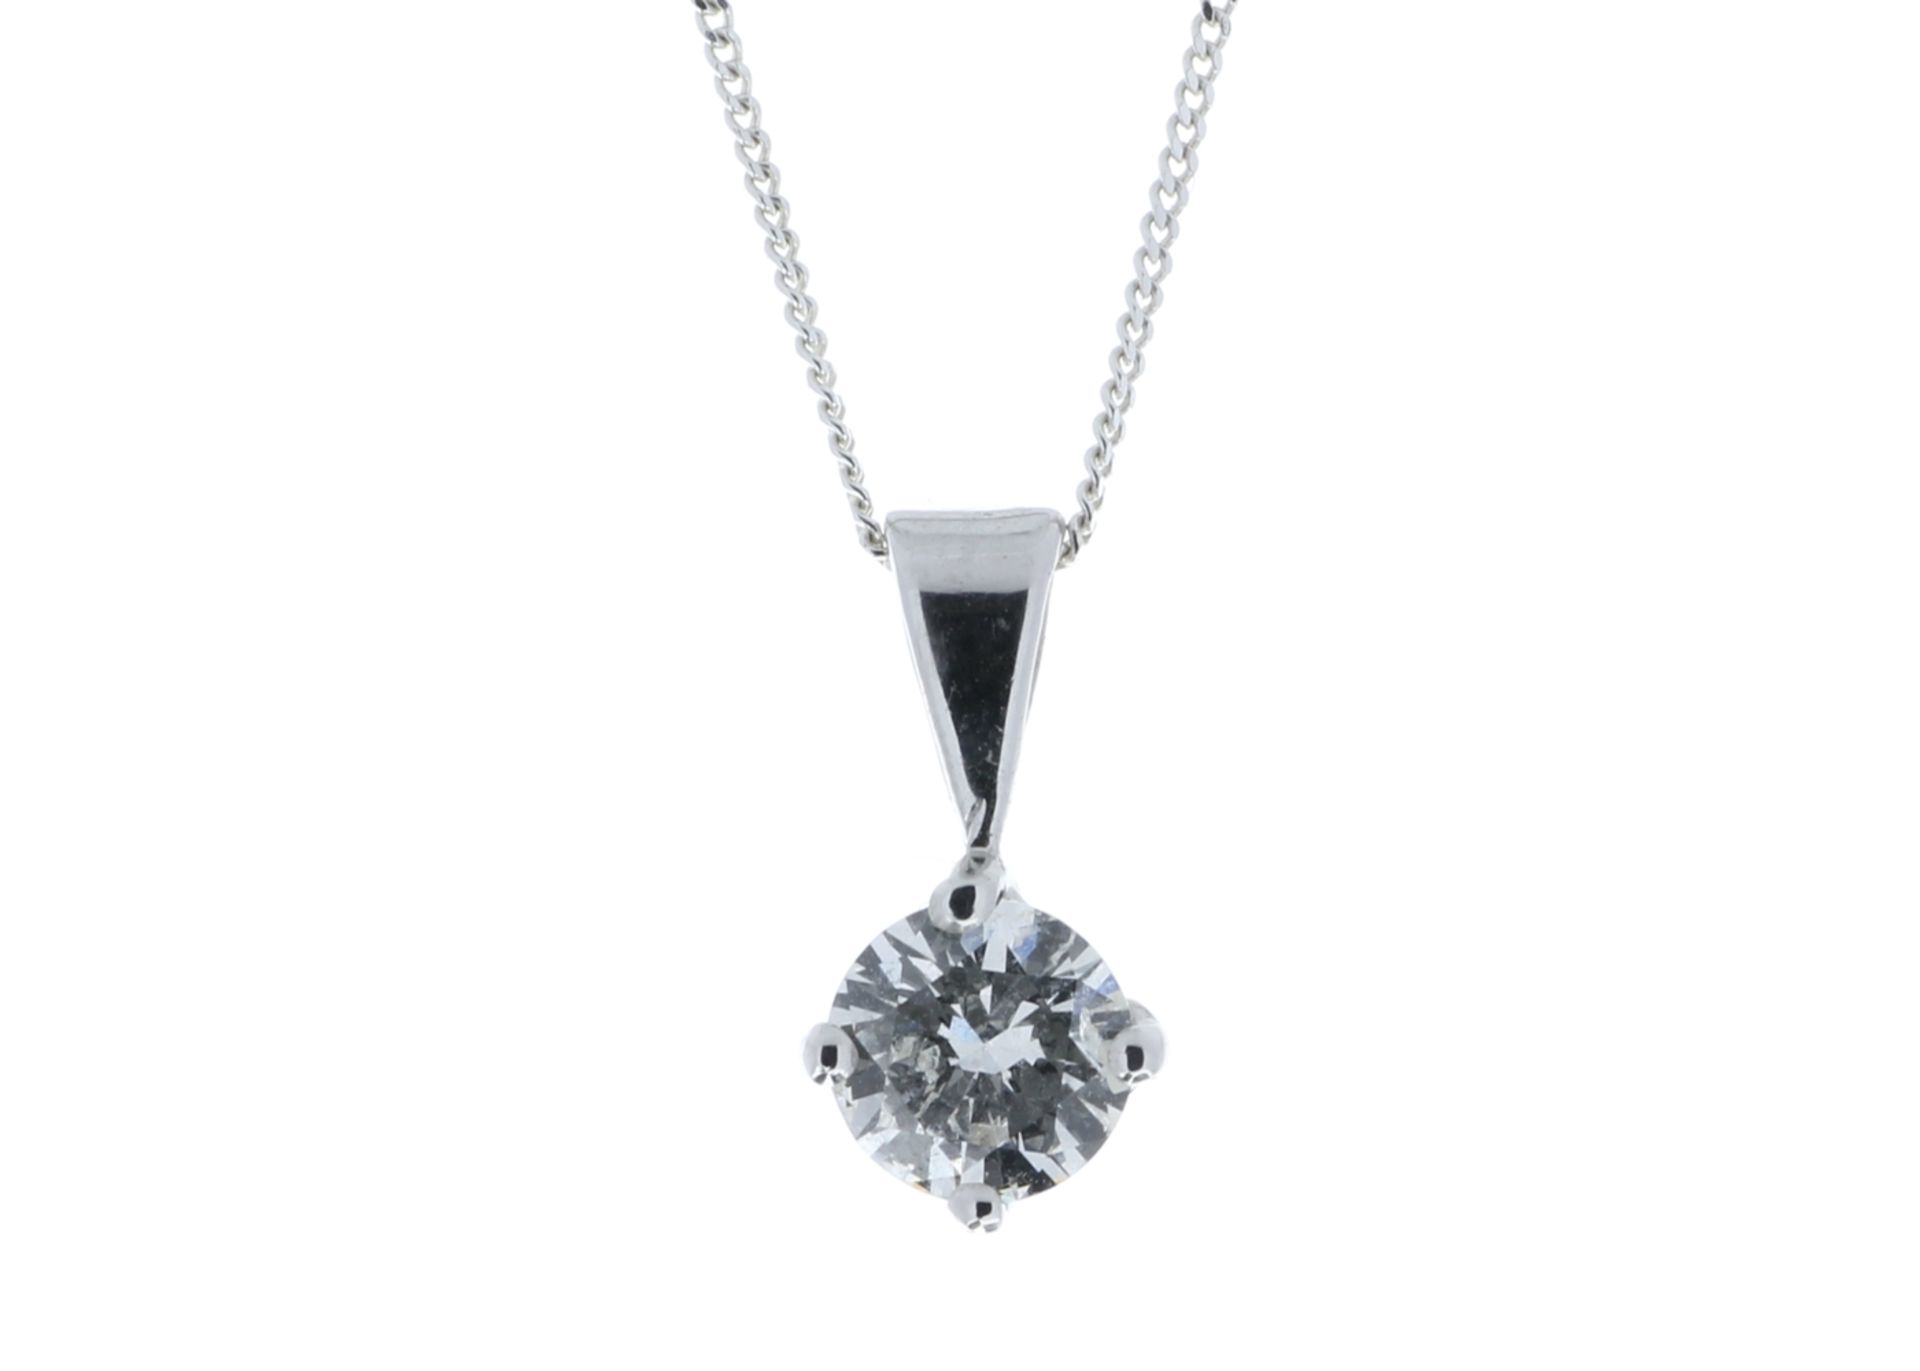 18ct White Gold Diamond Pendant 0.70 Carats - Valued By GIE £11,890.00 - One round brilliant cut